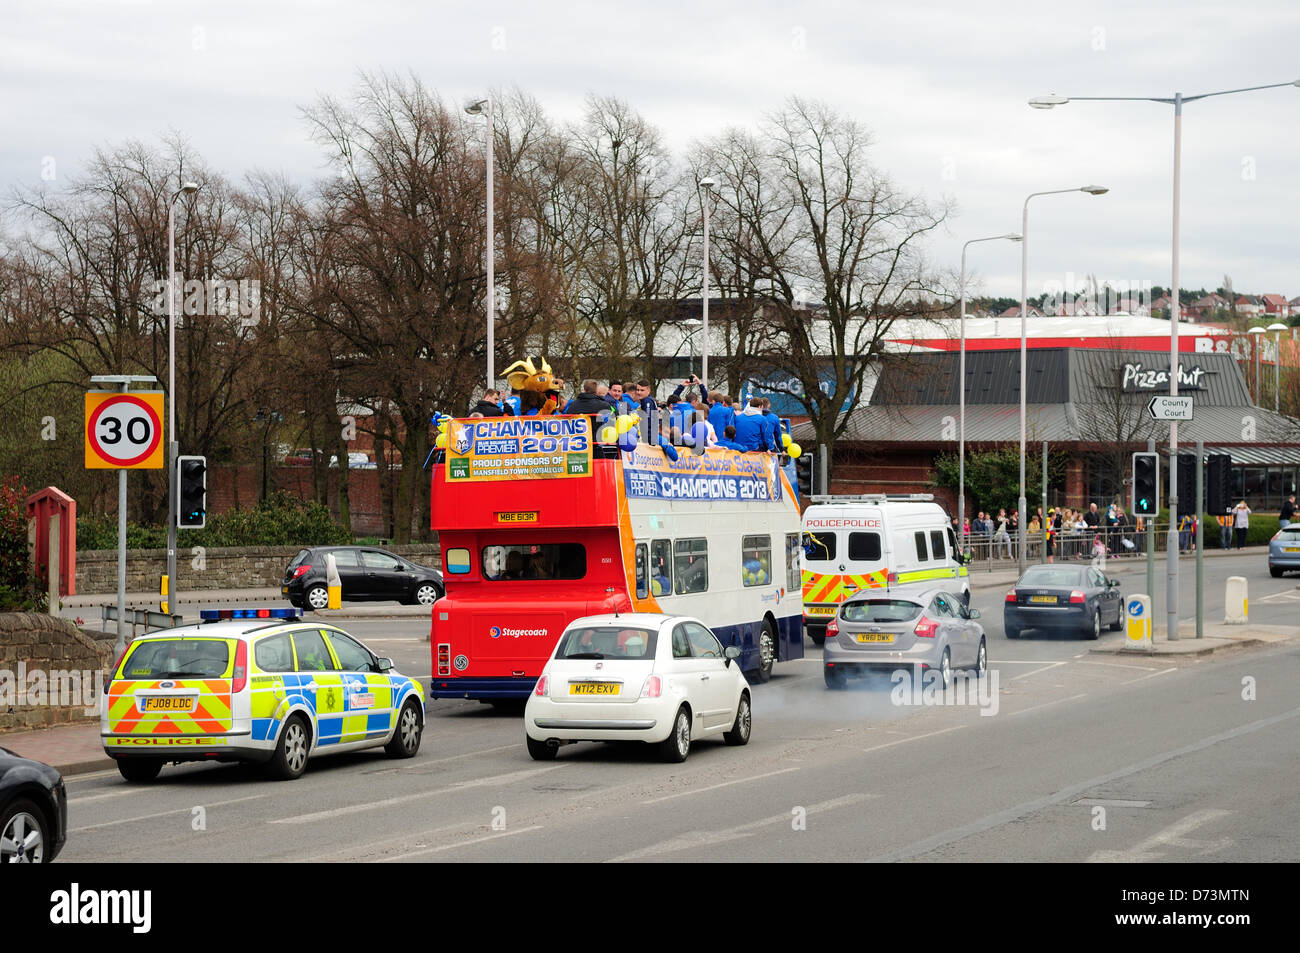 28th April 2013, Mansfield, Nottinghamshire, UK. Mansfield Town F.C. celebrate promotion back to league football next season (2013-2014)with an open top bus tour of the town.Fans turned out along the route singing and chanting as the team bus past by. Alamy Live News. Stock Photo